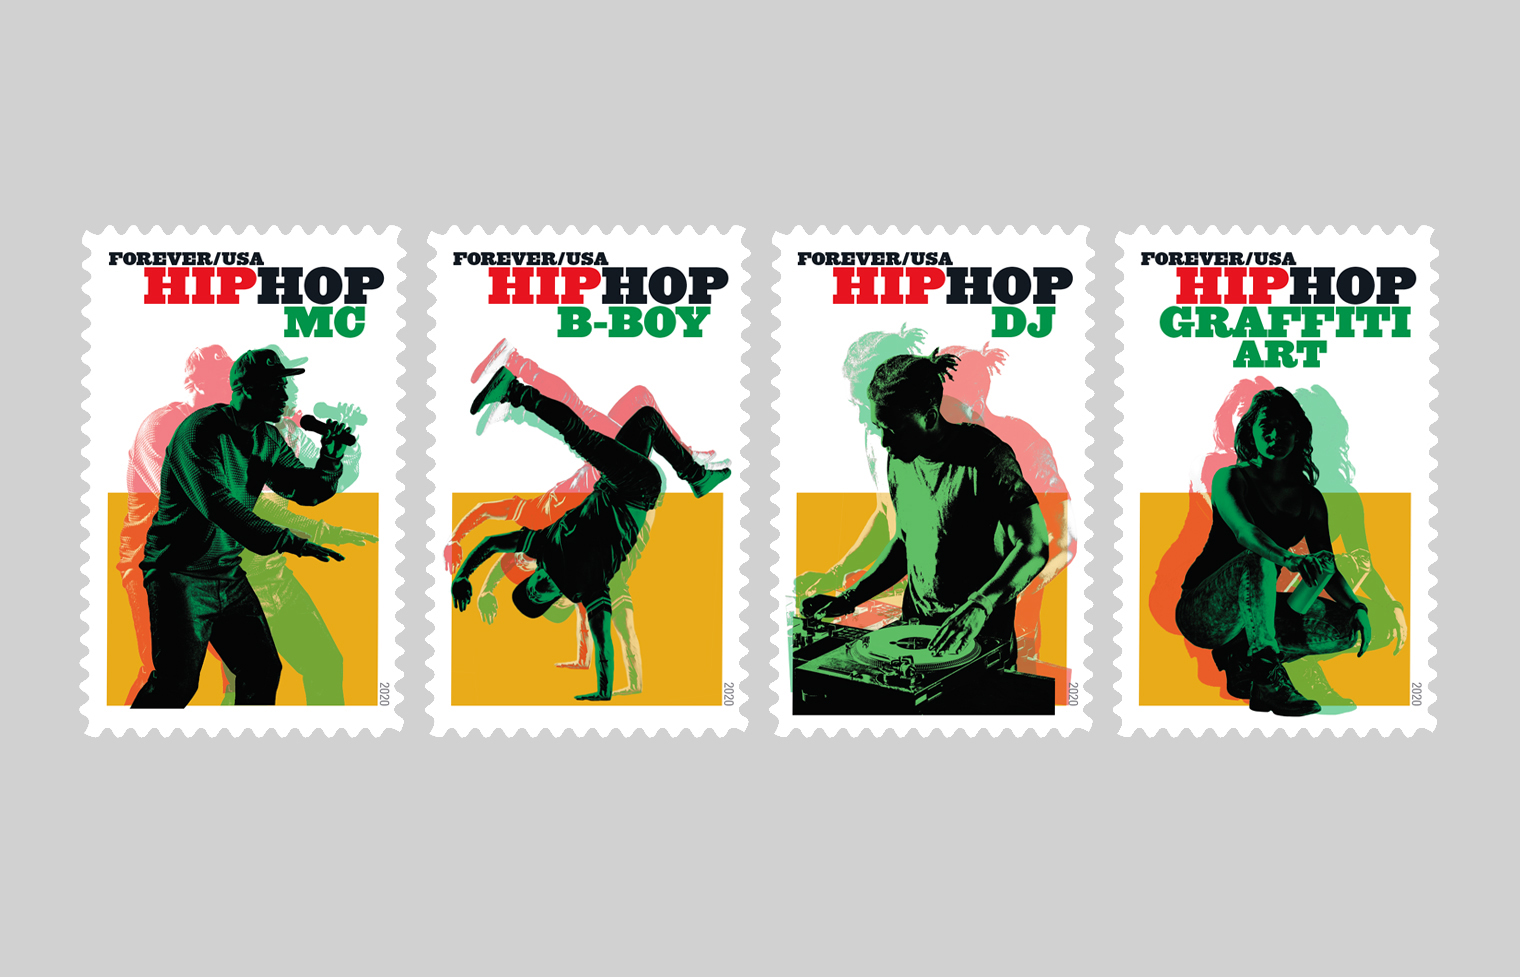 Representations of the four pillars of Hip Hop: MCing, DJing, B-Boying, and Graffiti are shown on the Hip Hop stamp series.